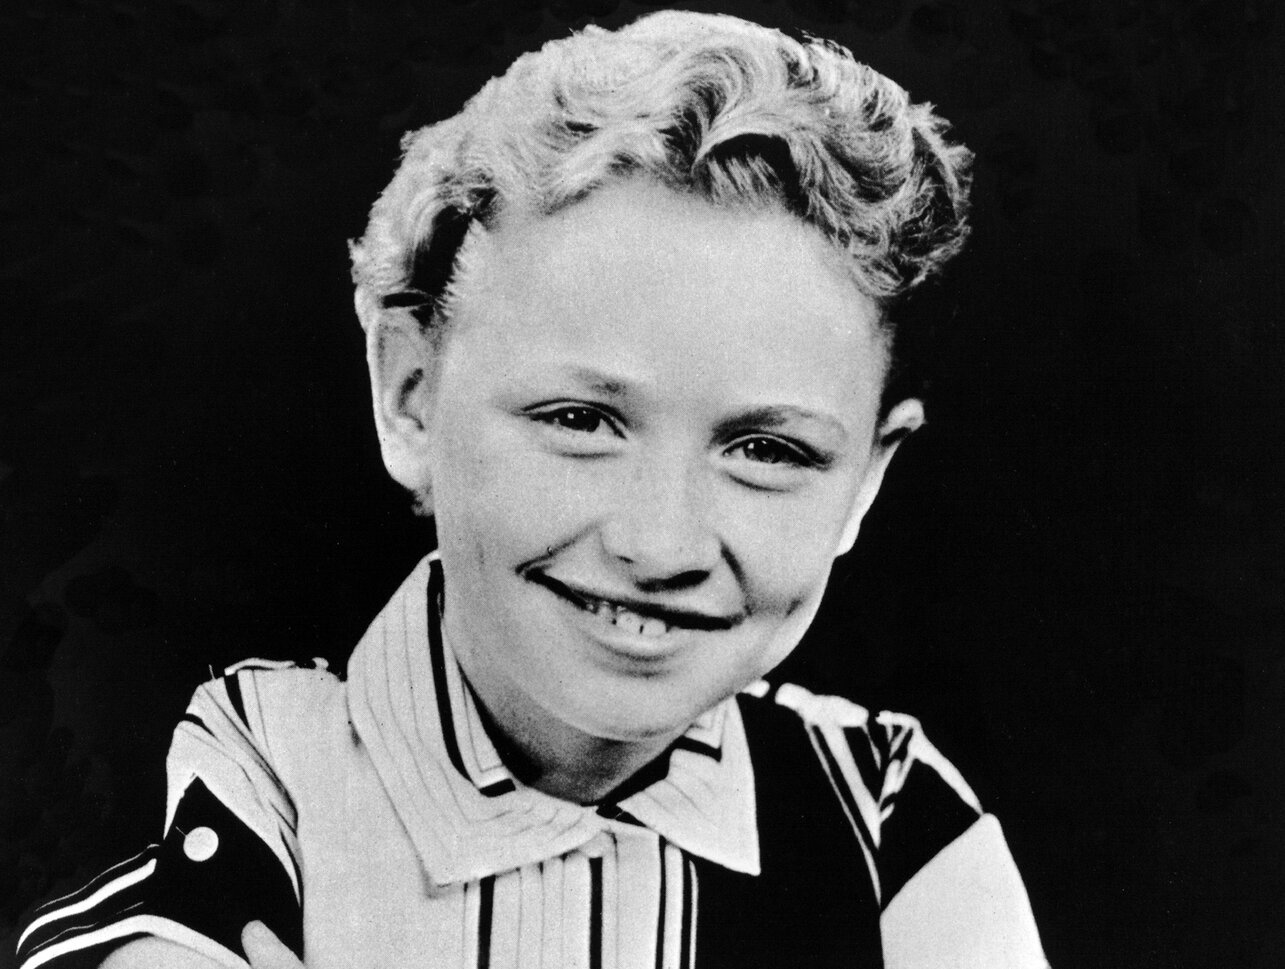 Dolly Parton as a child, photographed in black and white in 1955.